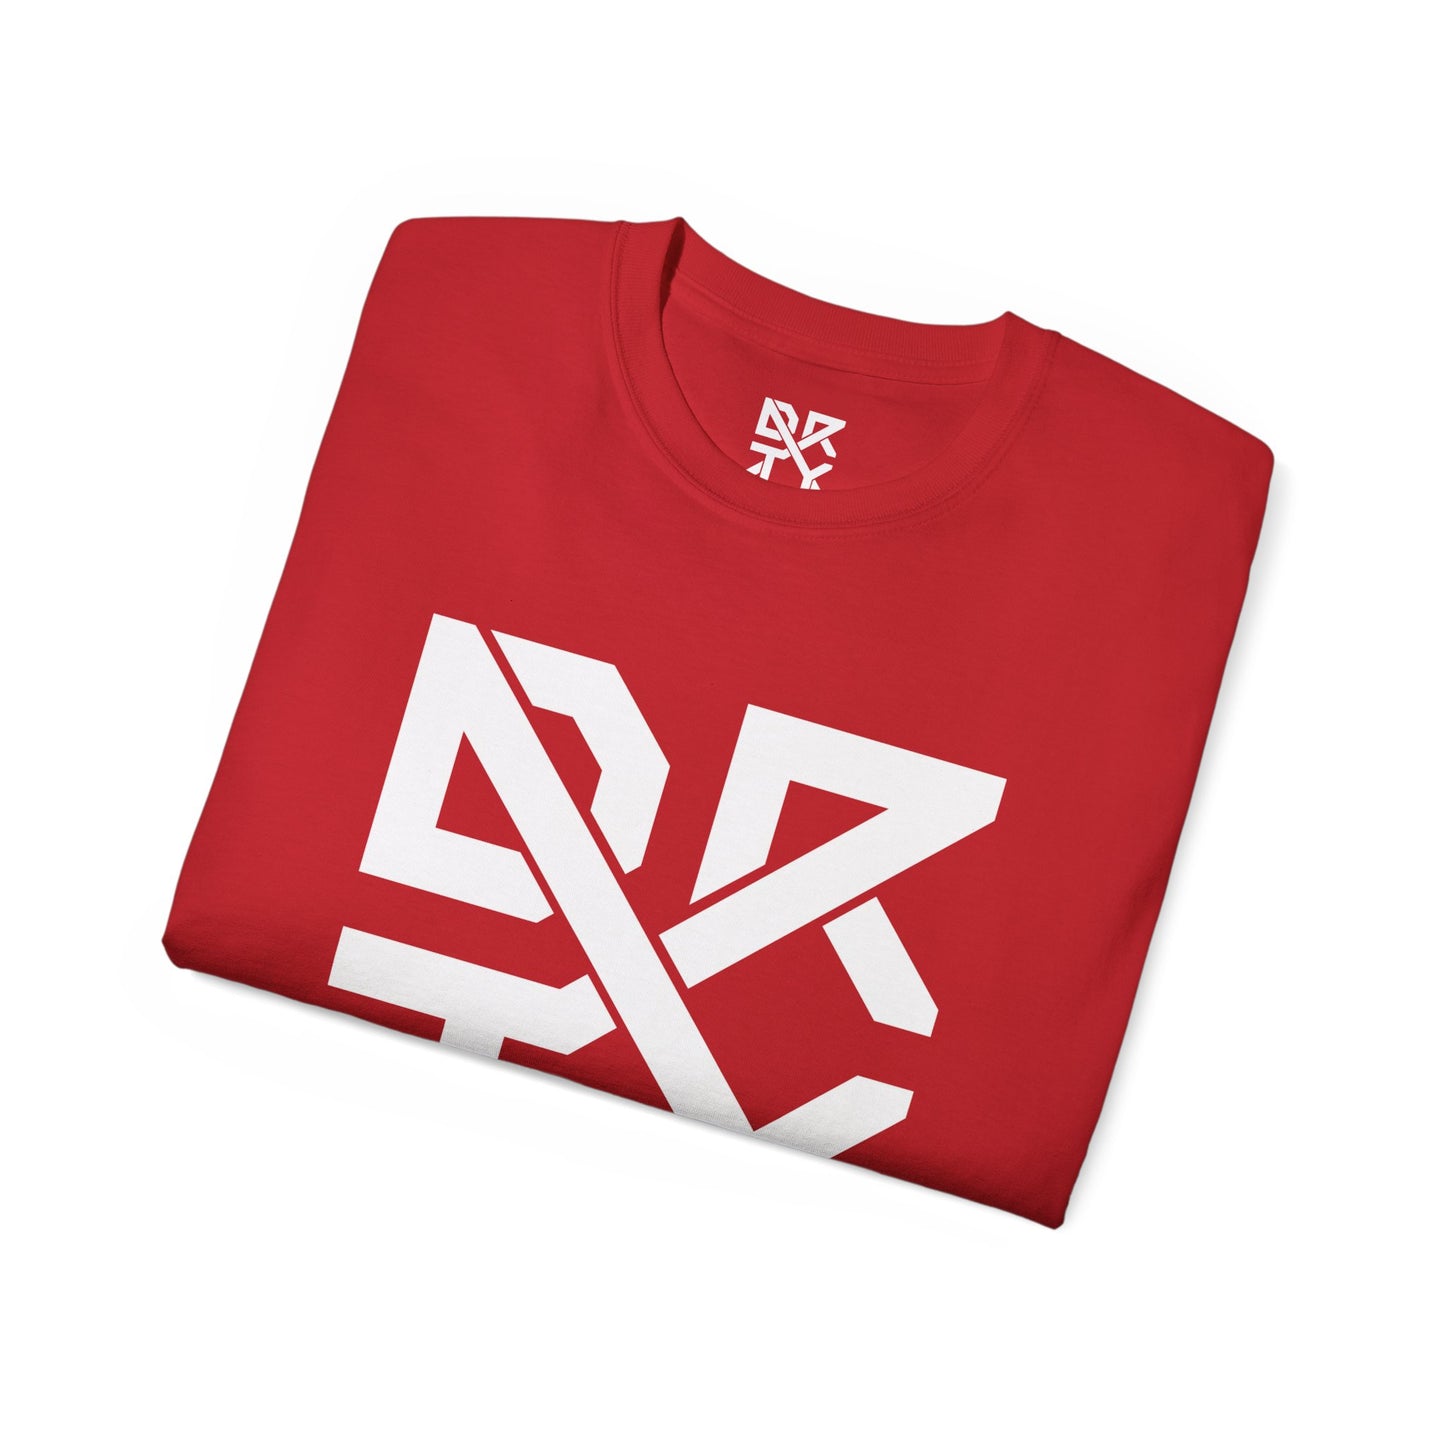 A folded view of the front of the shirt with a cropped DRTY X logo in the collar and front of the shirt.